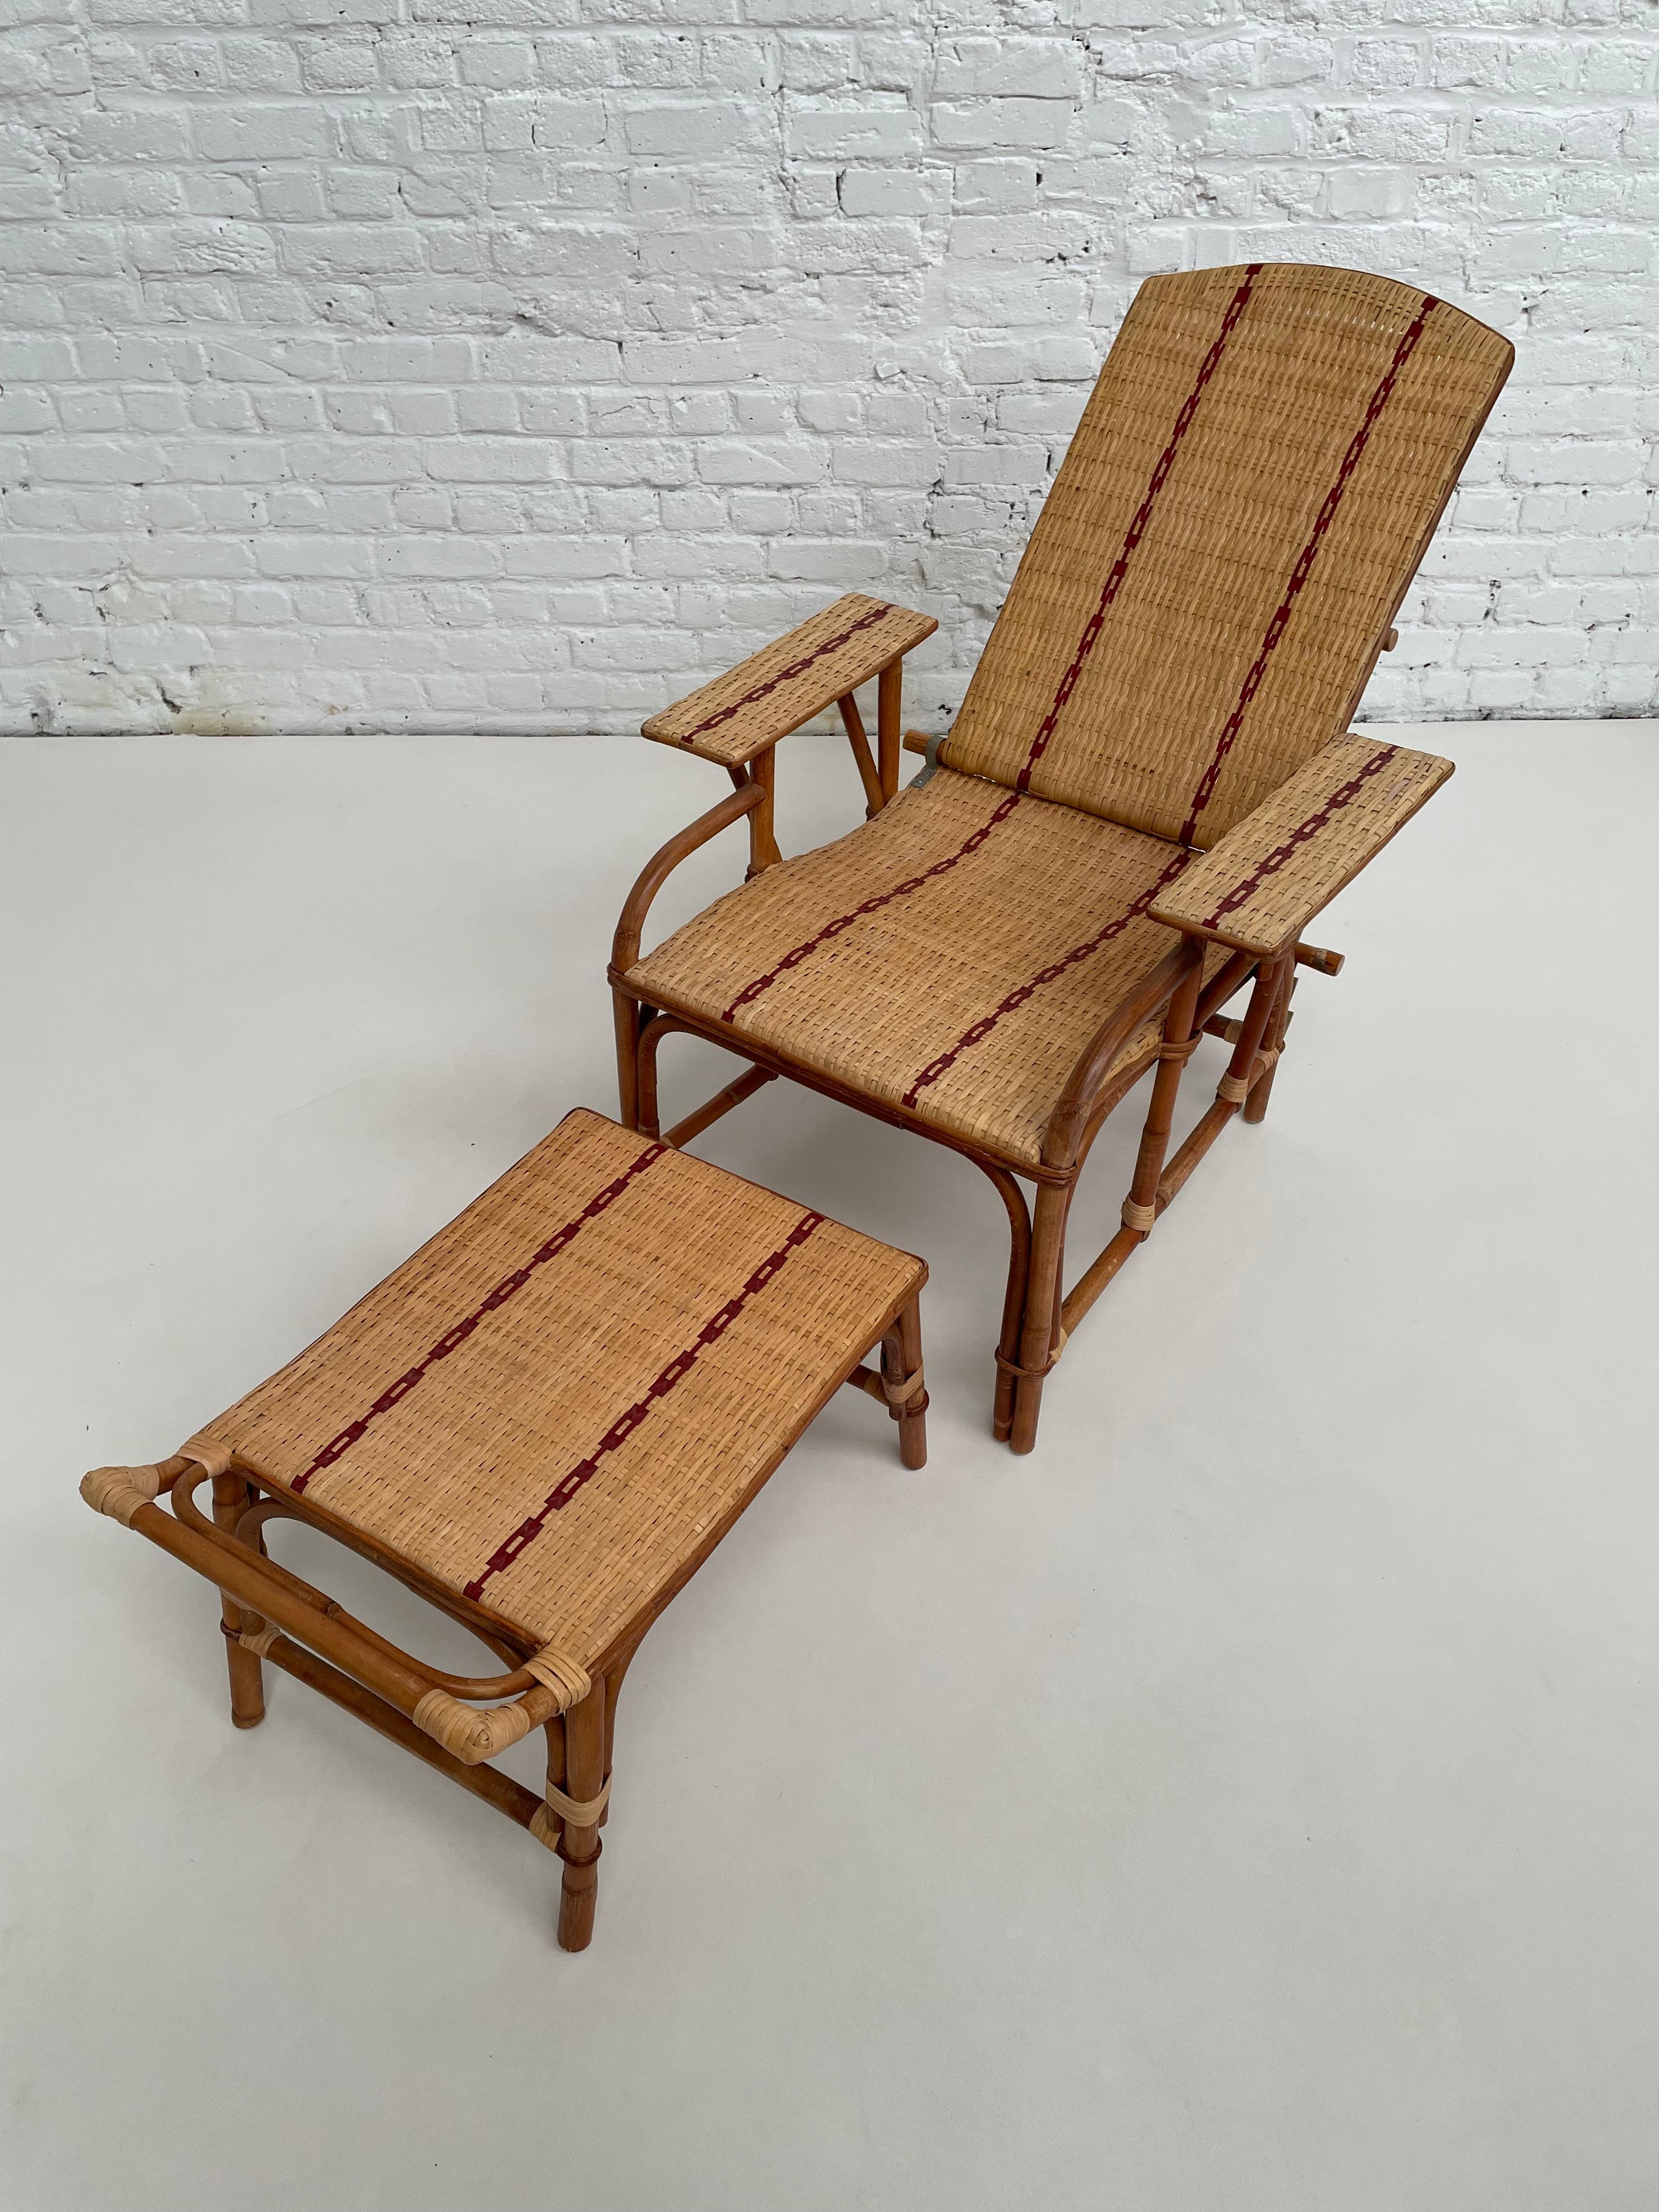 French Design rattan and wicker recliner and relax chaise longue composed of an armchair in rattan structure, braided wicker back and seat with a red outline and its matching footstool. Famous design from the beginning of the 20th century, it will